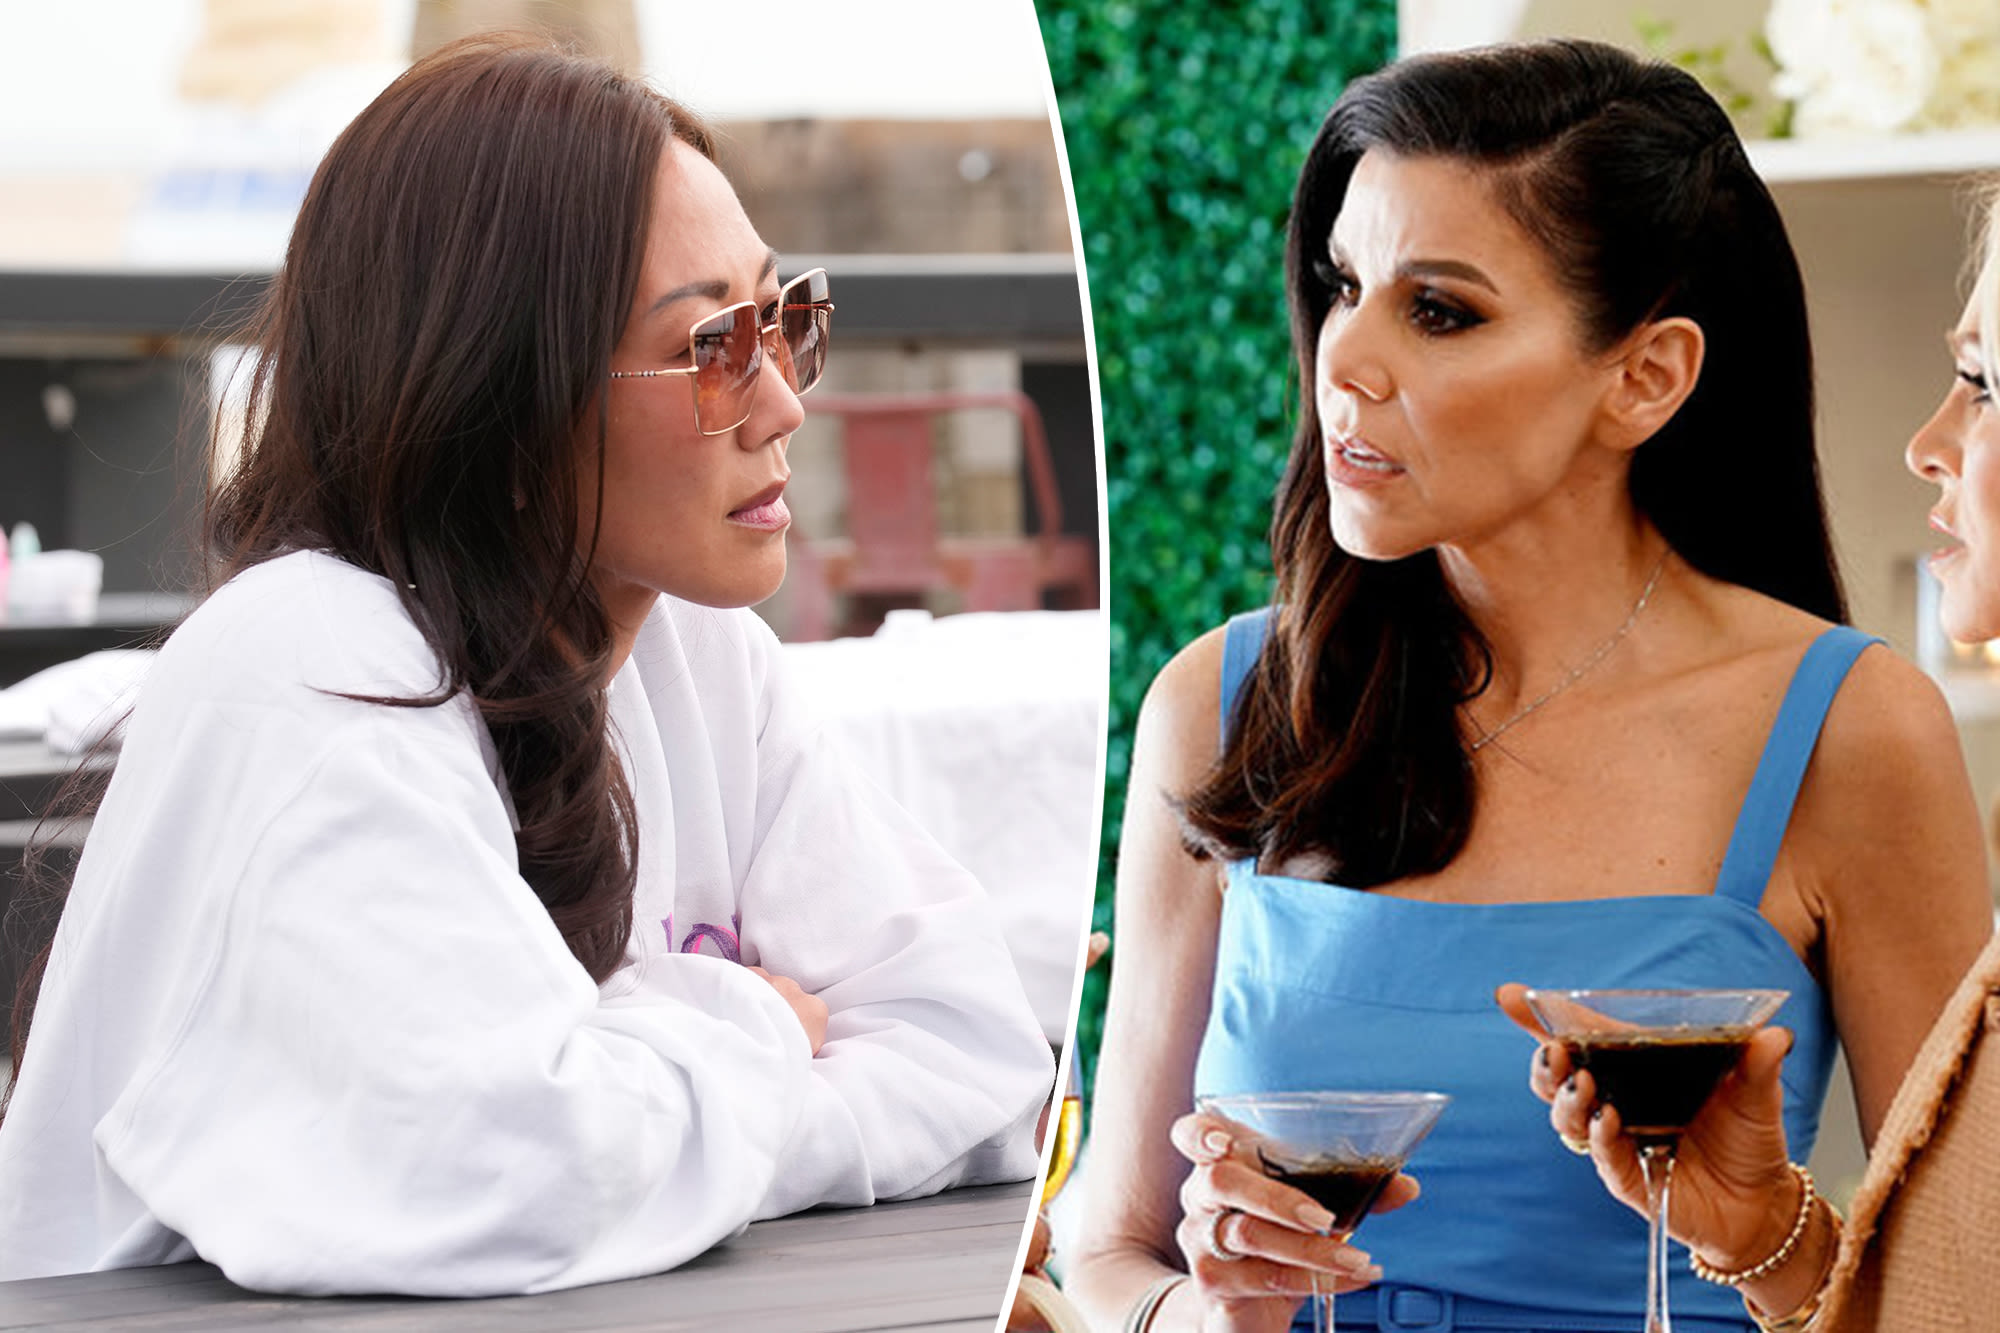 ‘RHOC’ star Heather Dubrow denies she ‘snubbed’ newbie Katie Ginella: ‘That’s not who I am’